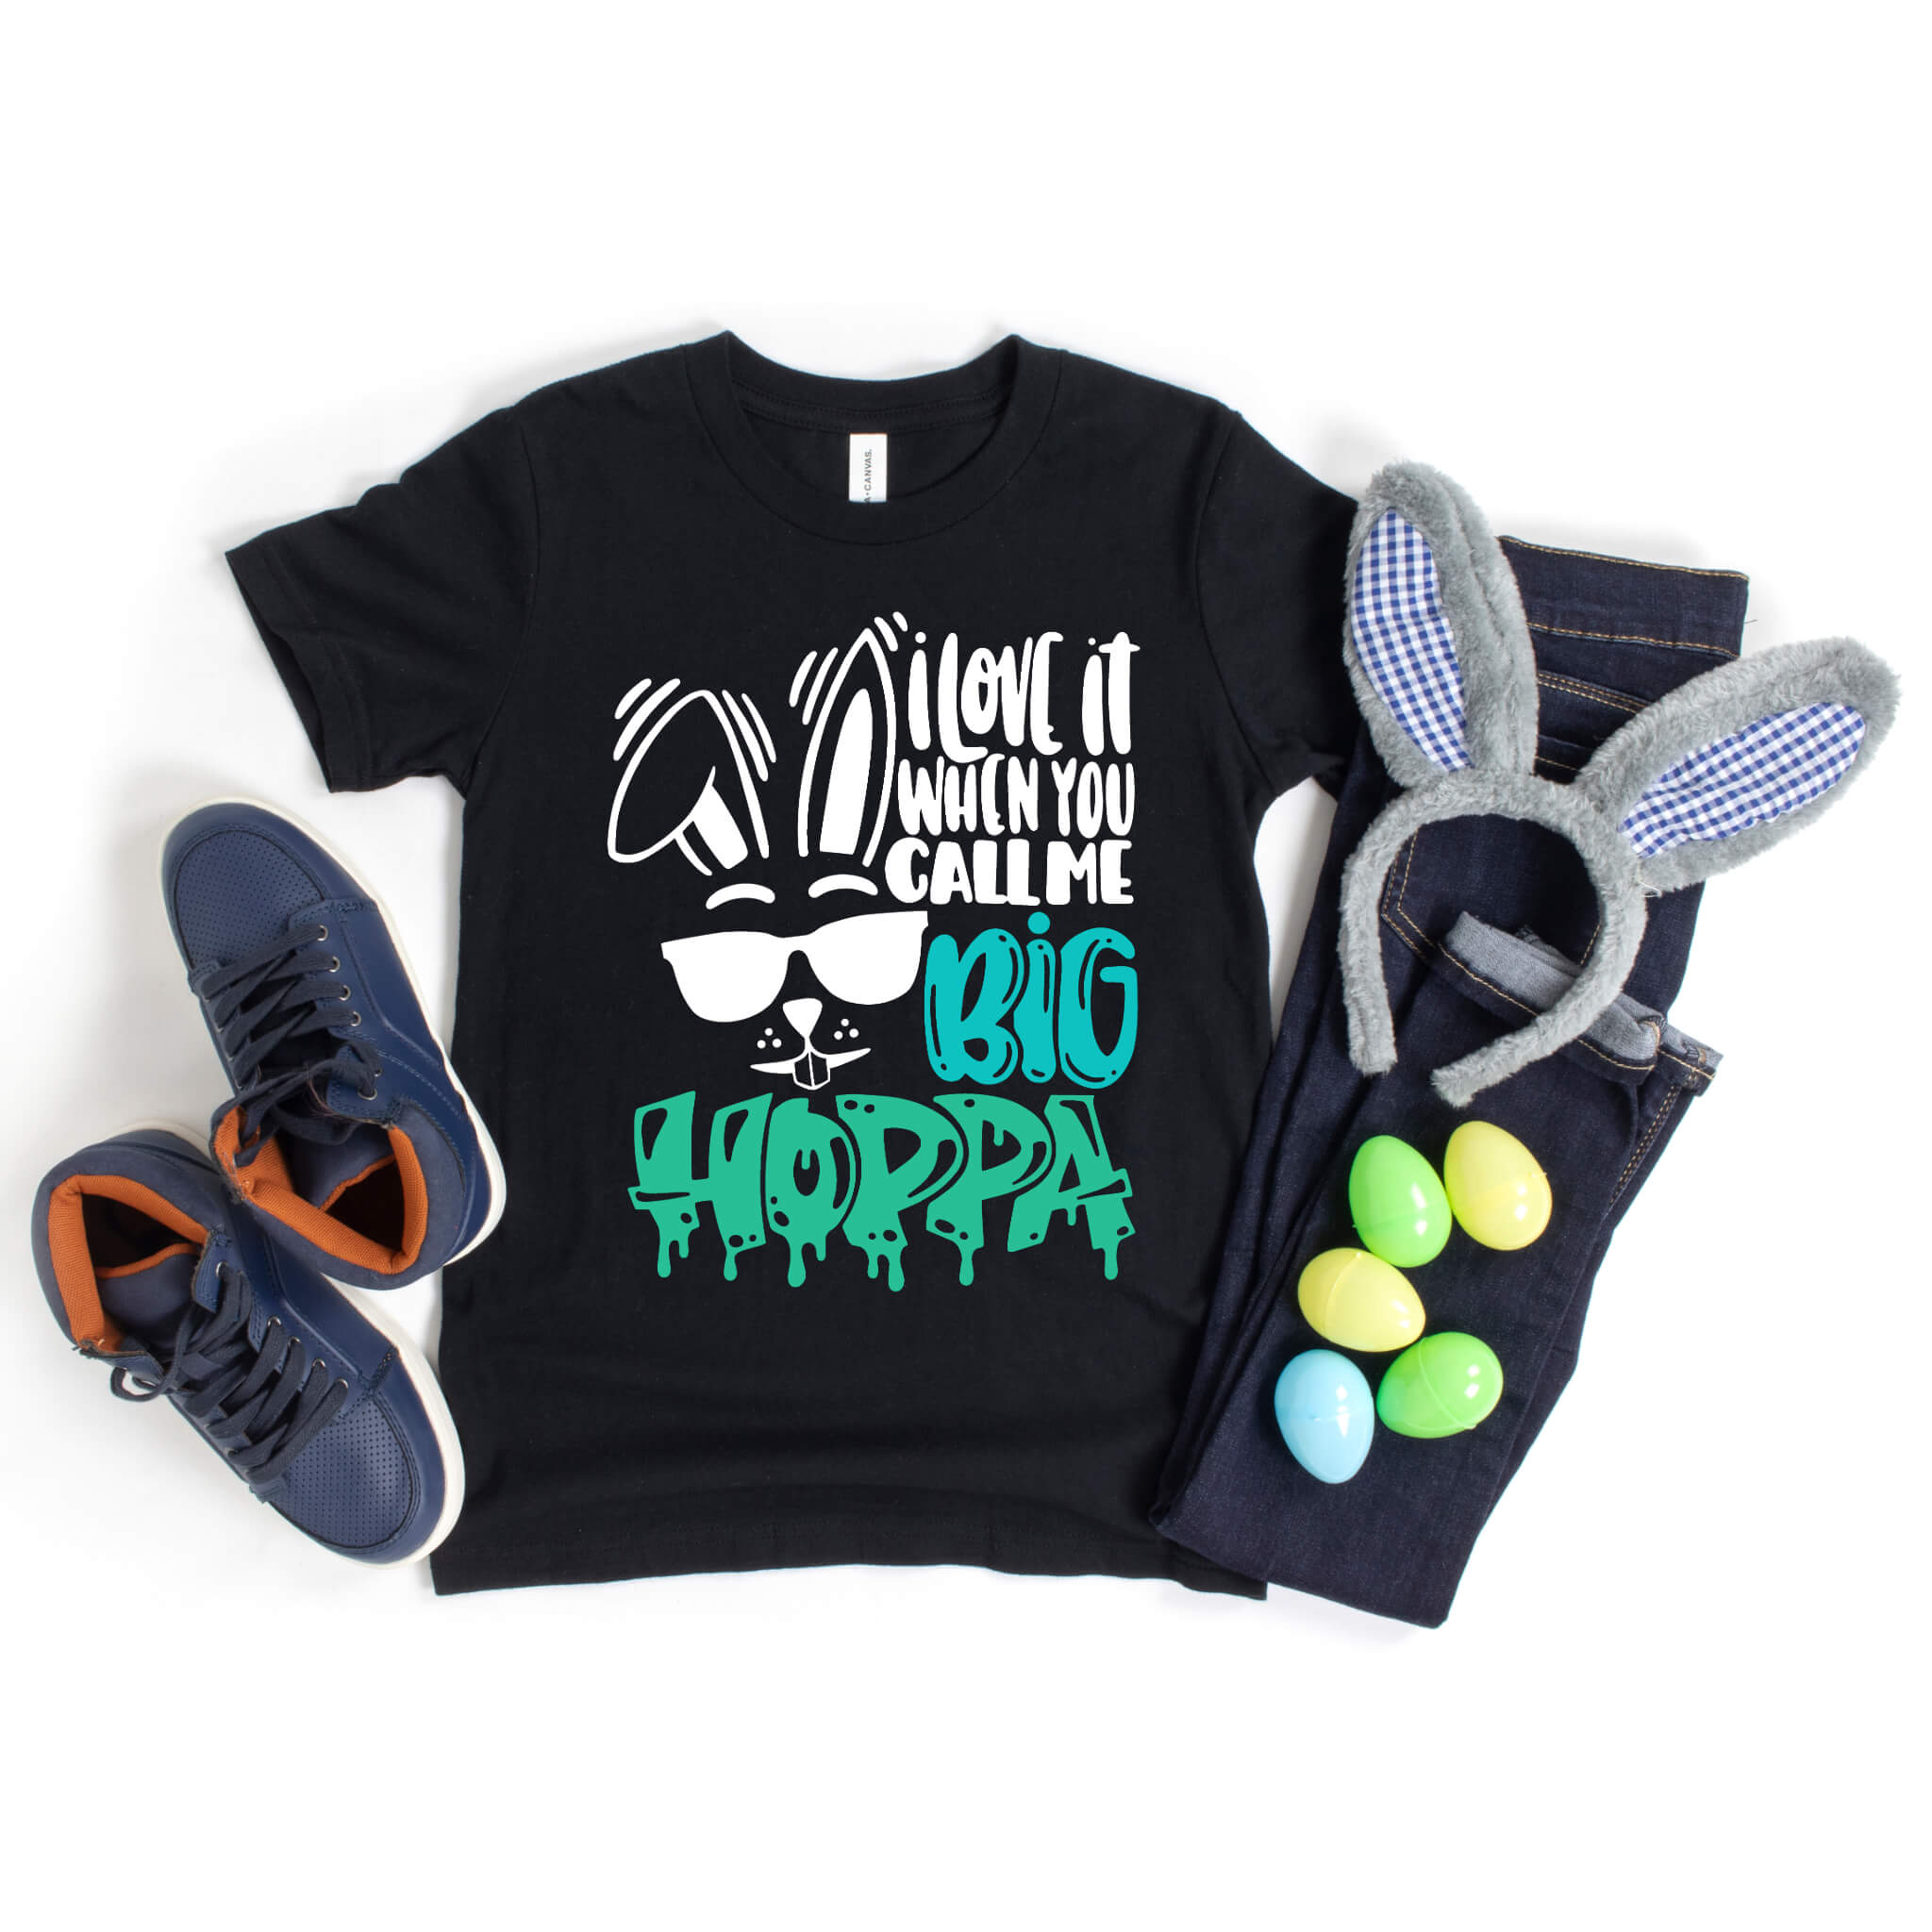 Easter, I Love It When You Call Me Big Hoppa, Funny, Customized, Personalized, Boy's Guy's Men's, Youth, Adult, T-Shirt